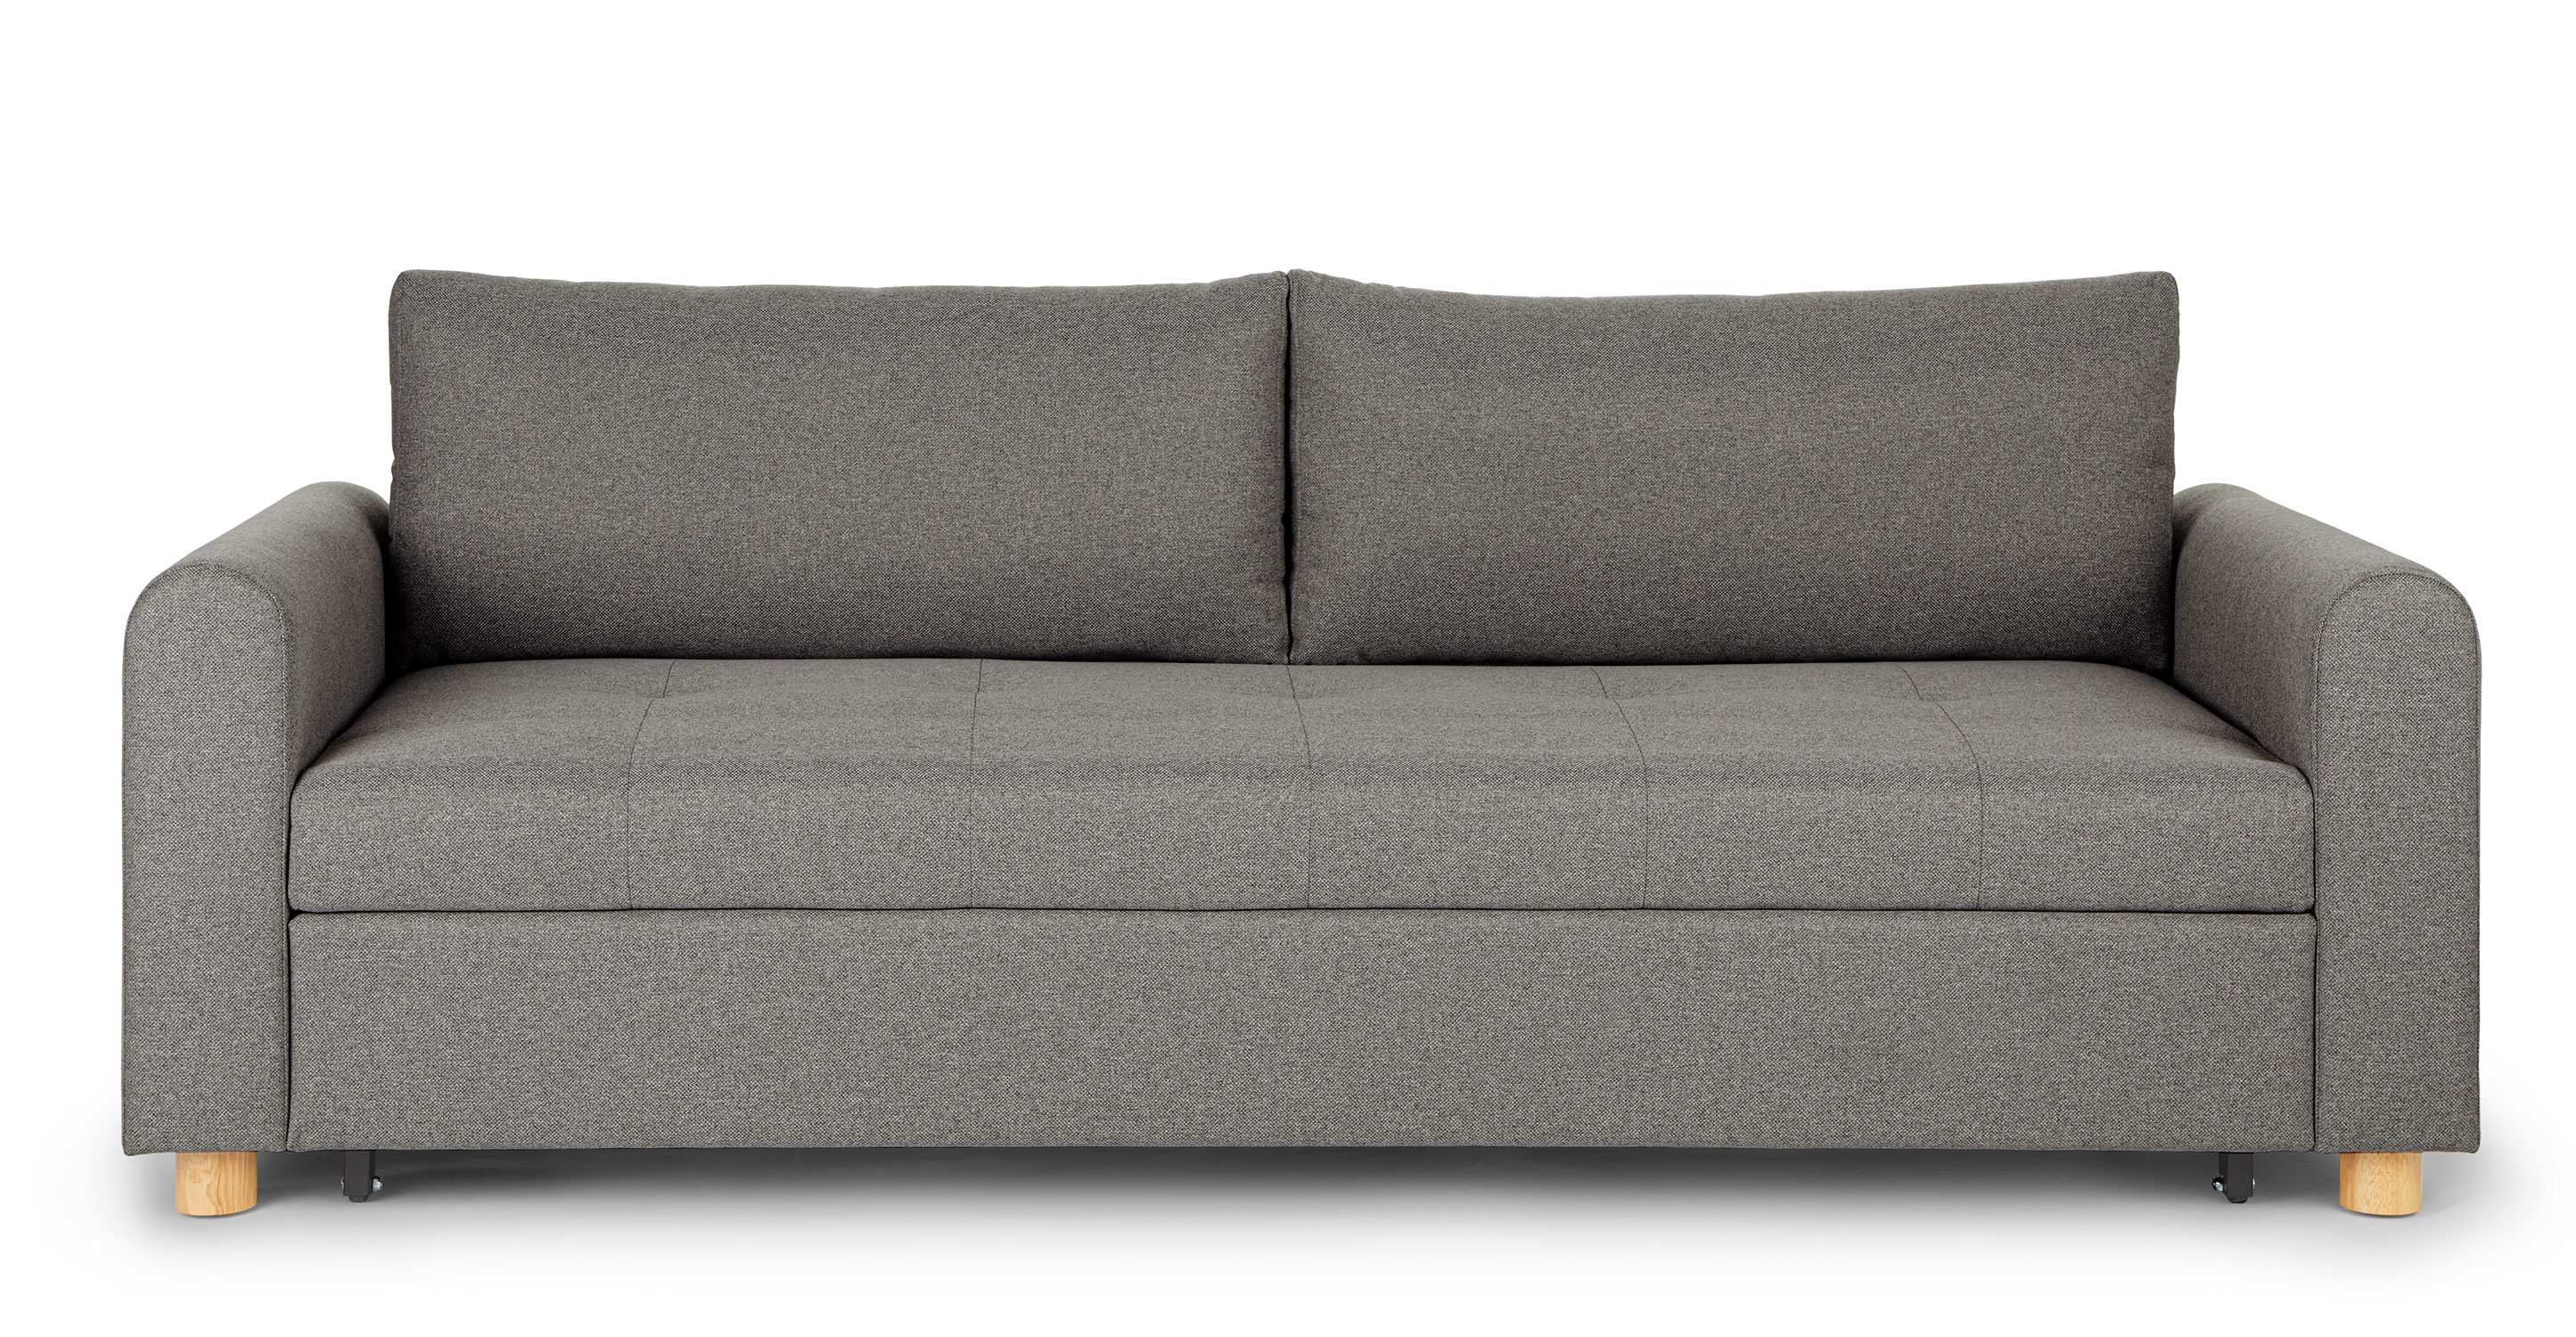 Henge Gray 2 Seater Fabric Sofa Bed Nordby Article